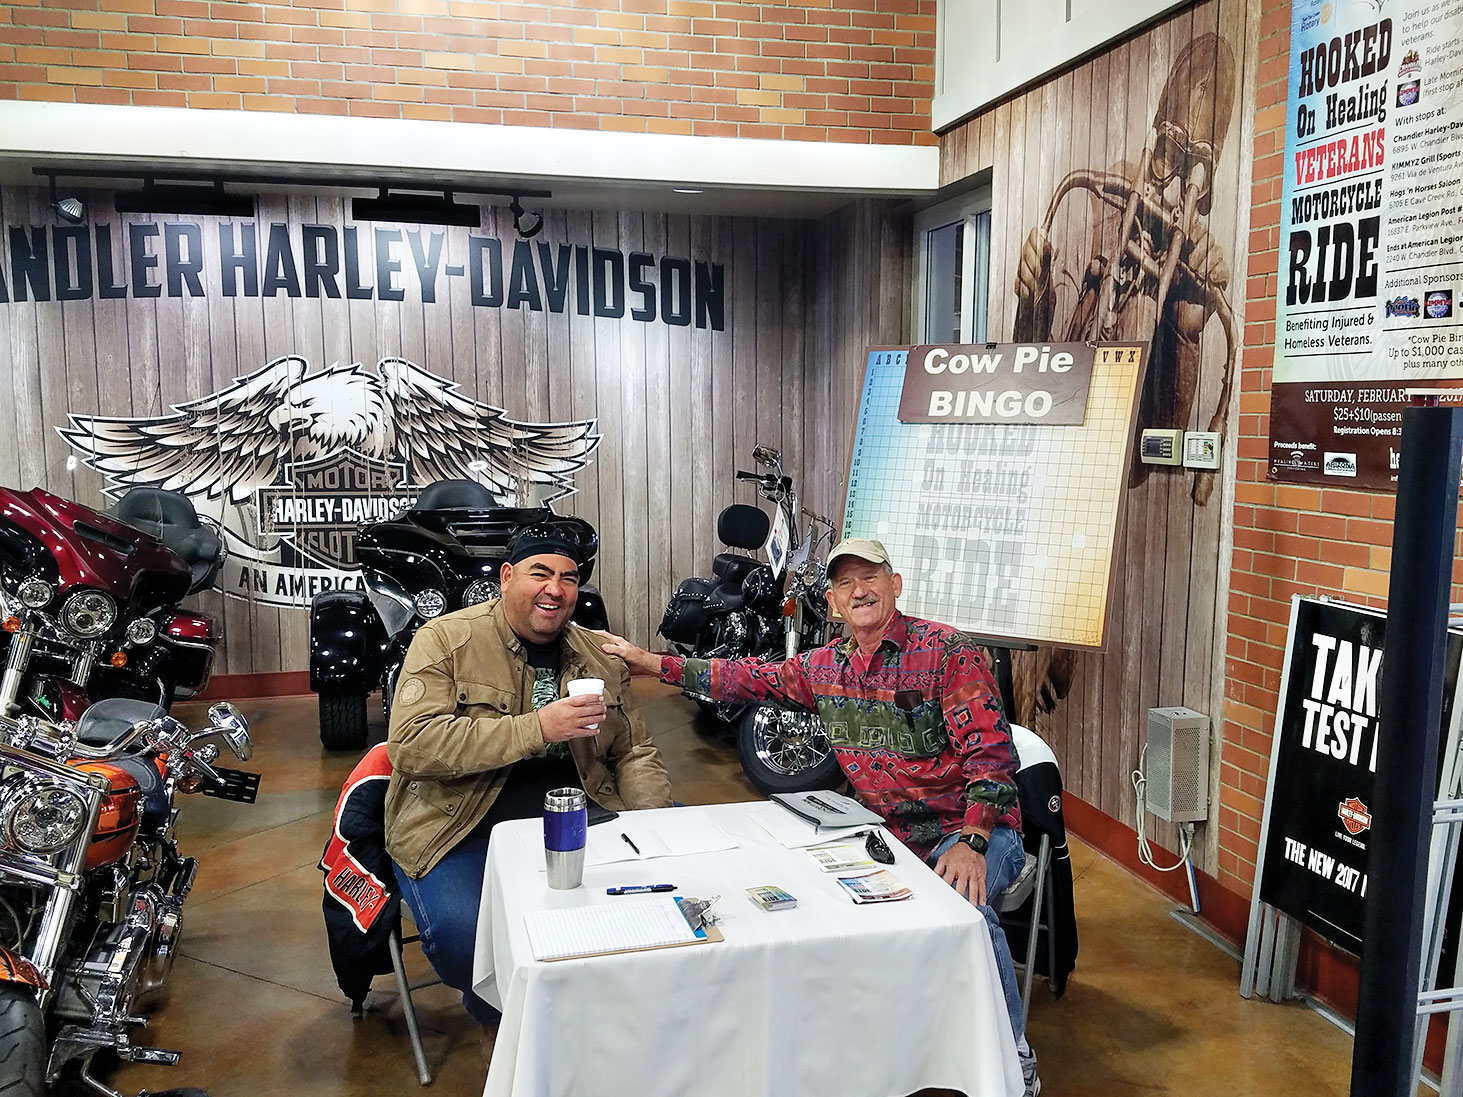 San Tan Crown Rotarians Terry Lubsen and James Kame hard at work selling Cow Pie Bingo tickets at Chandler Harley-Davidson January 7, 2017.